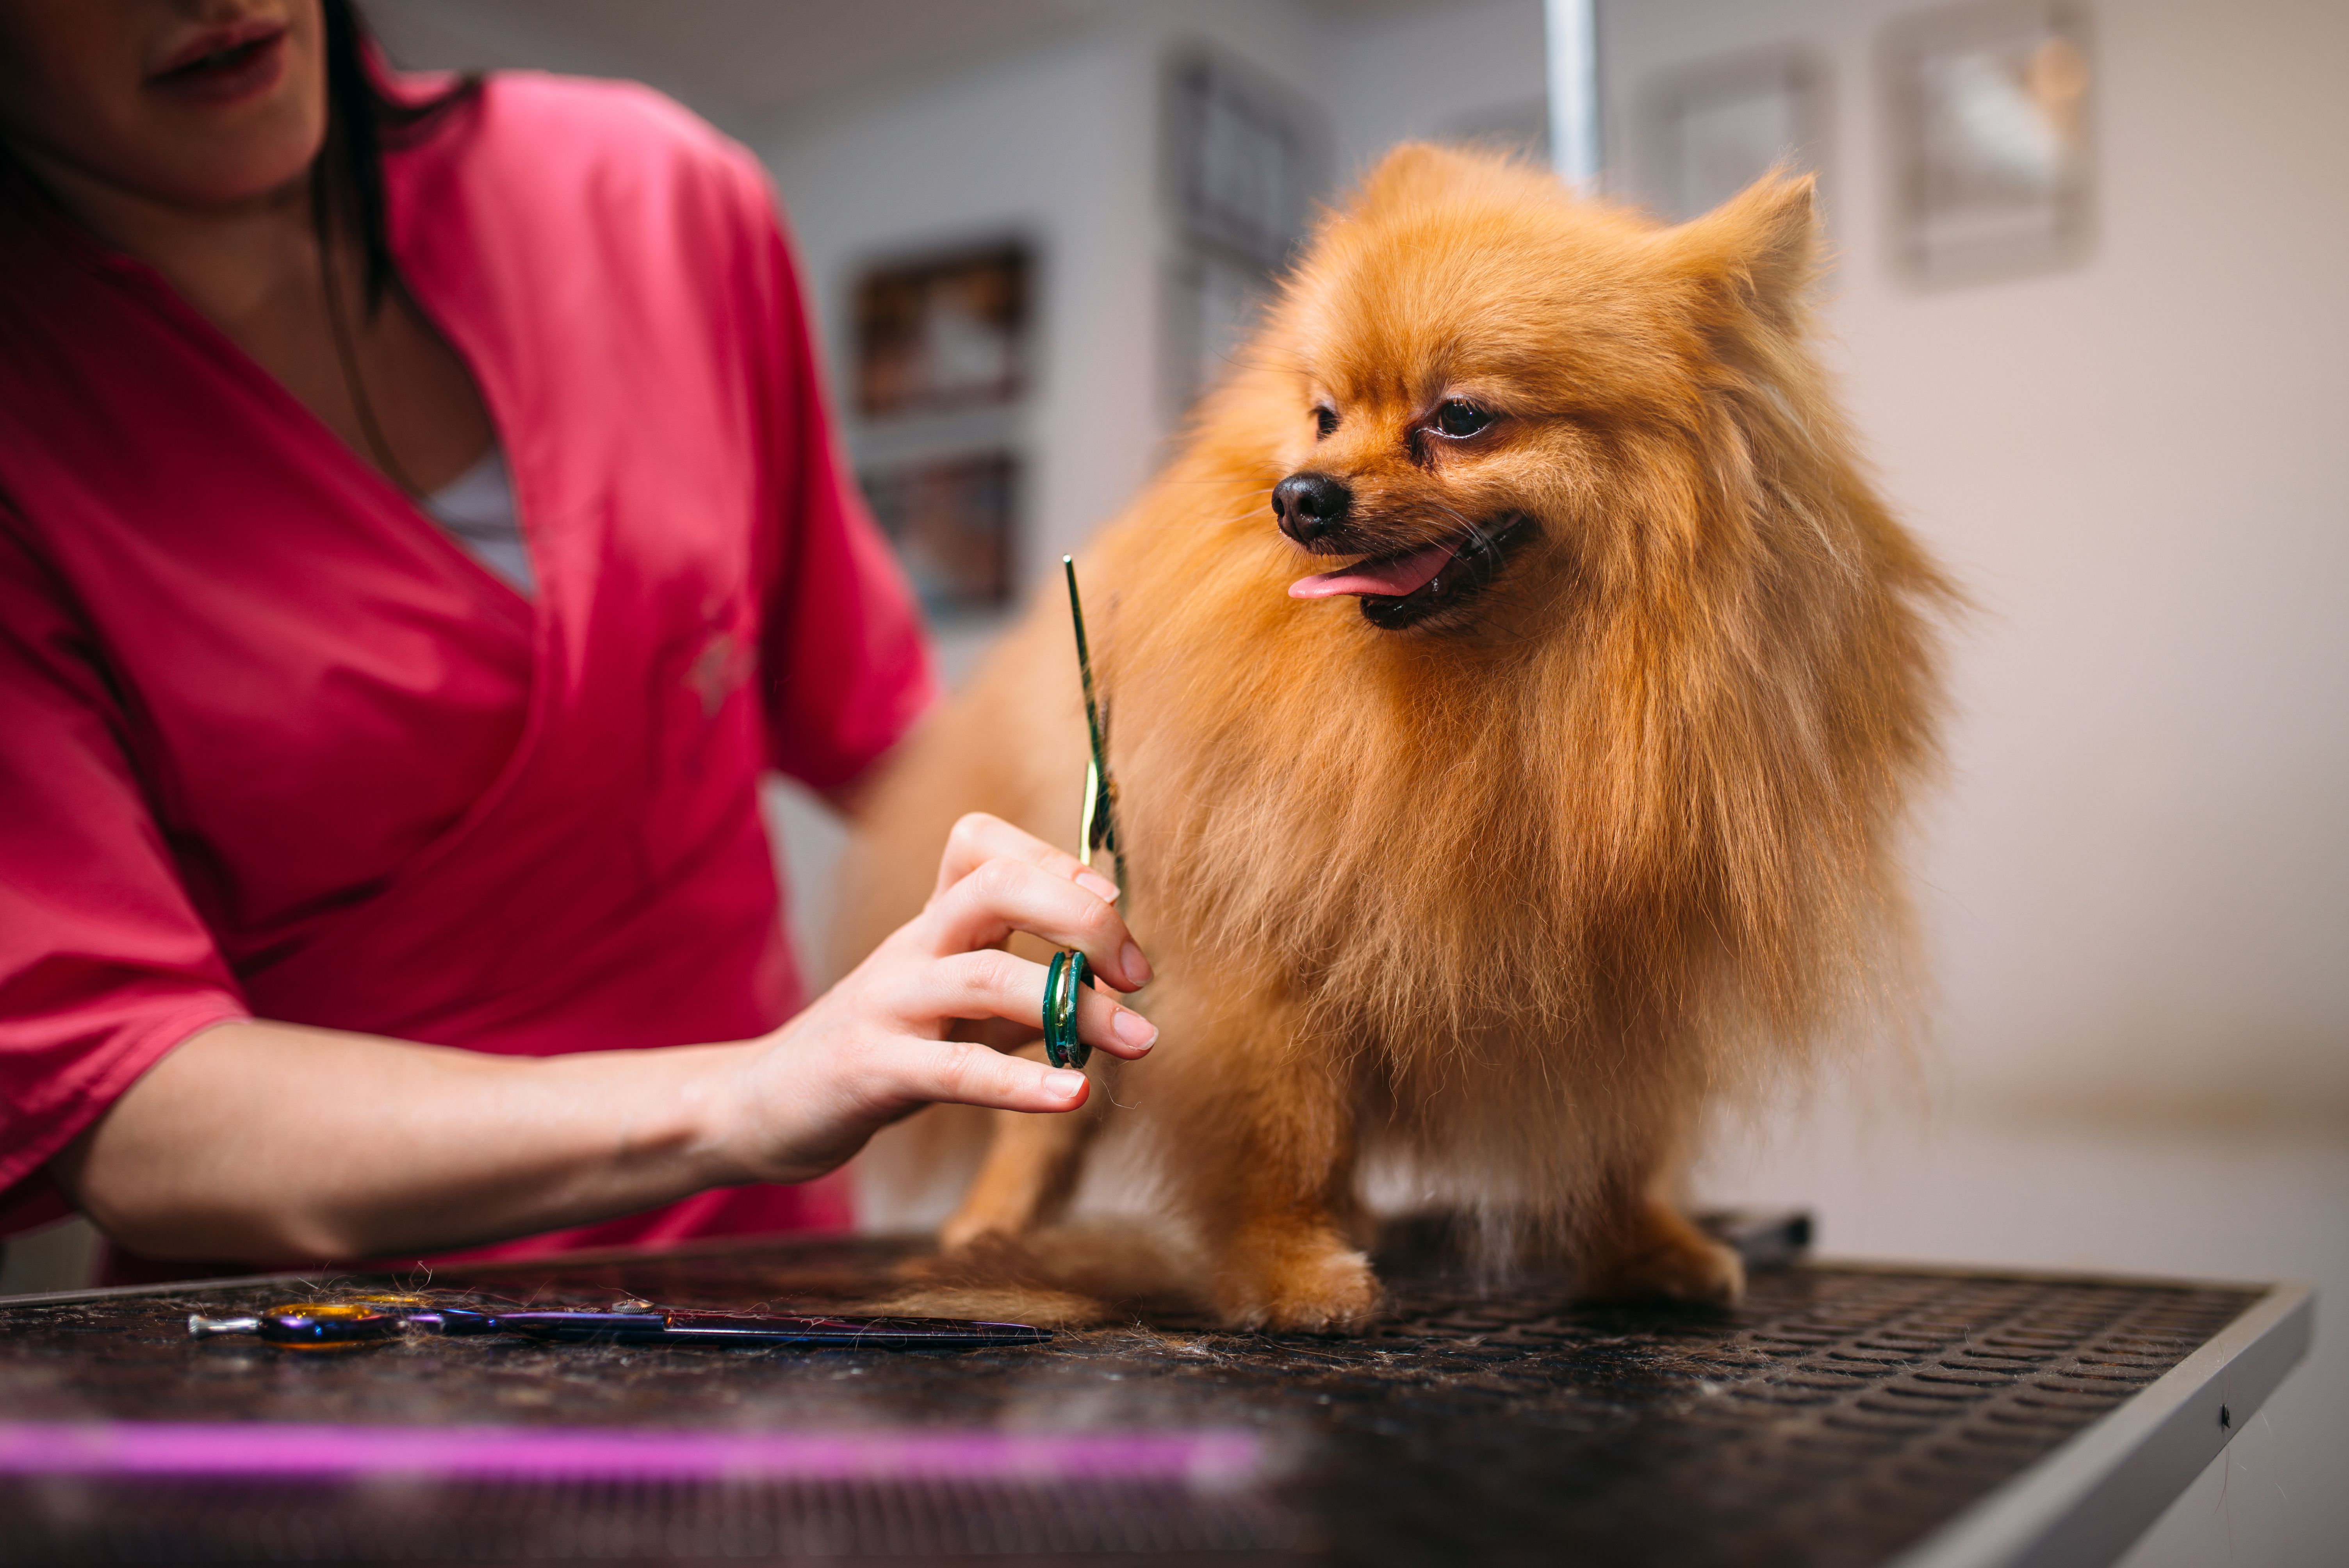 What is dog grooming?